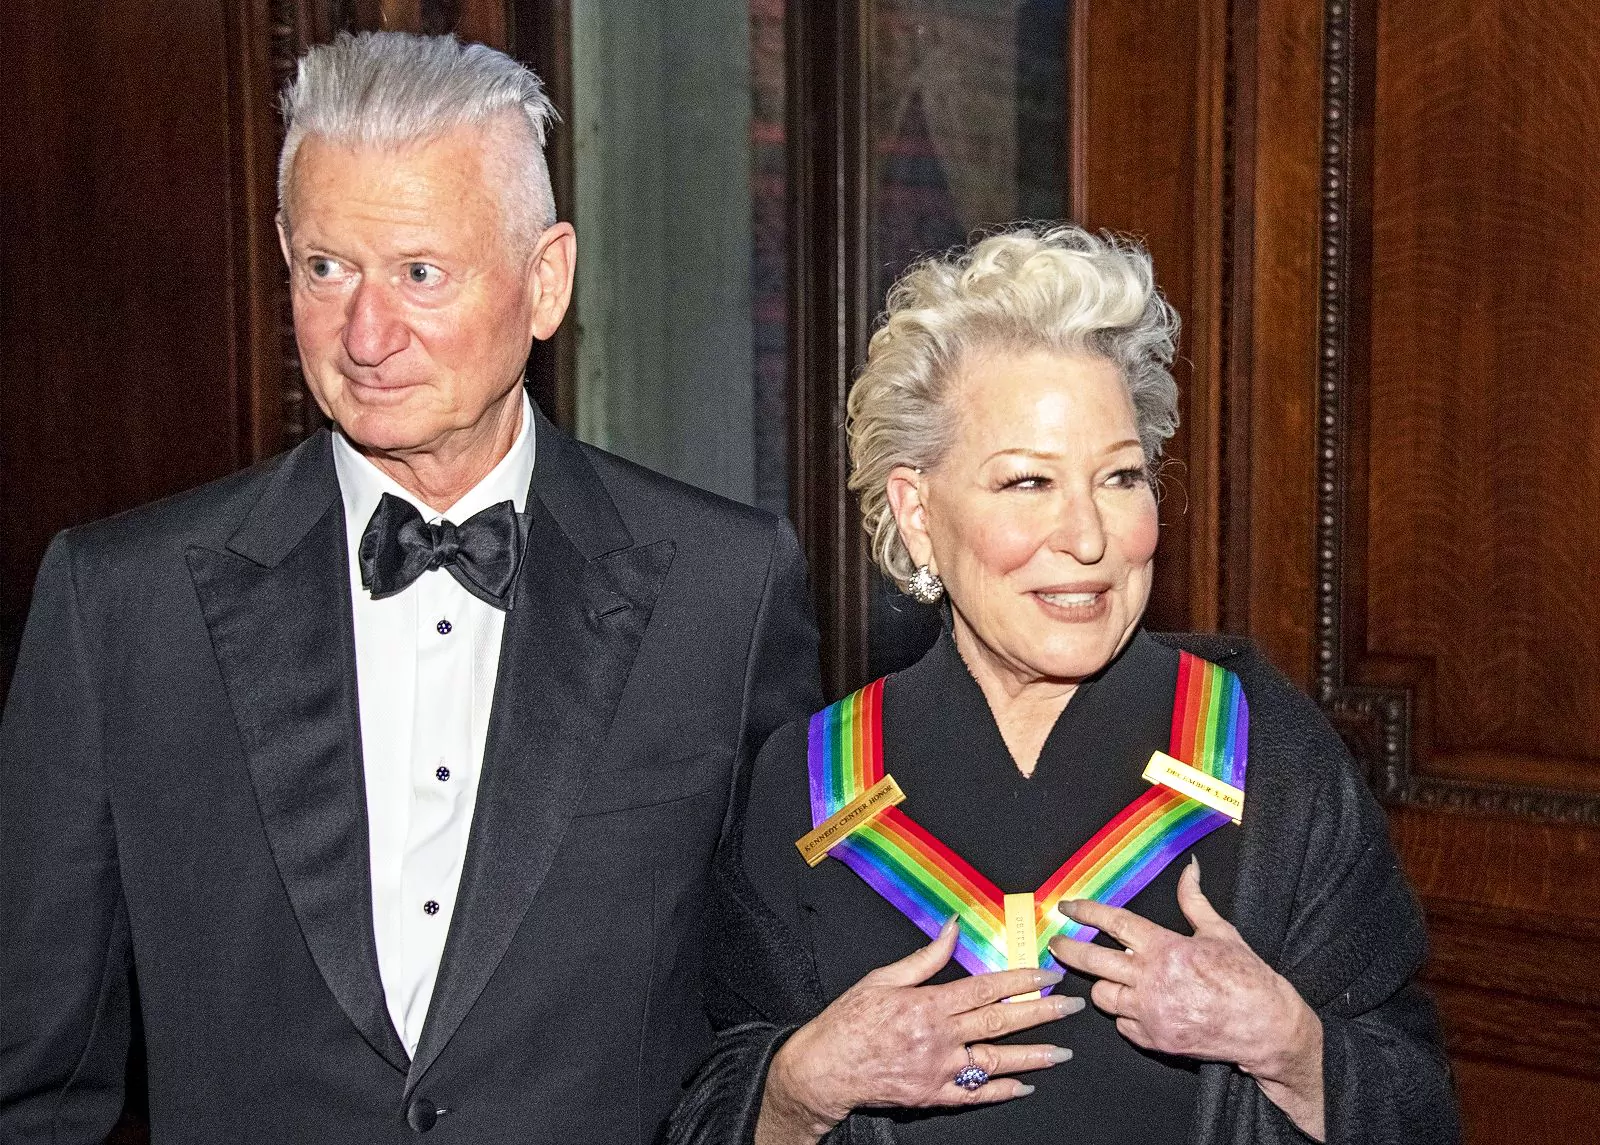 Bette Midler with husband Martin von Haselberg at the medal ceremony at the Library of Congress in Washington, December 4, 2021.